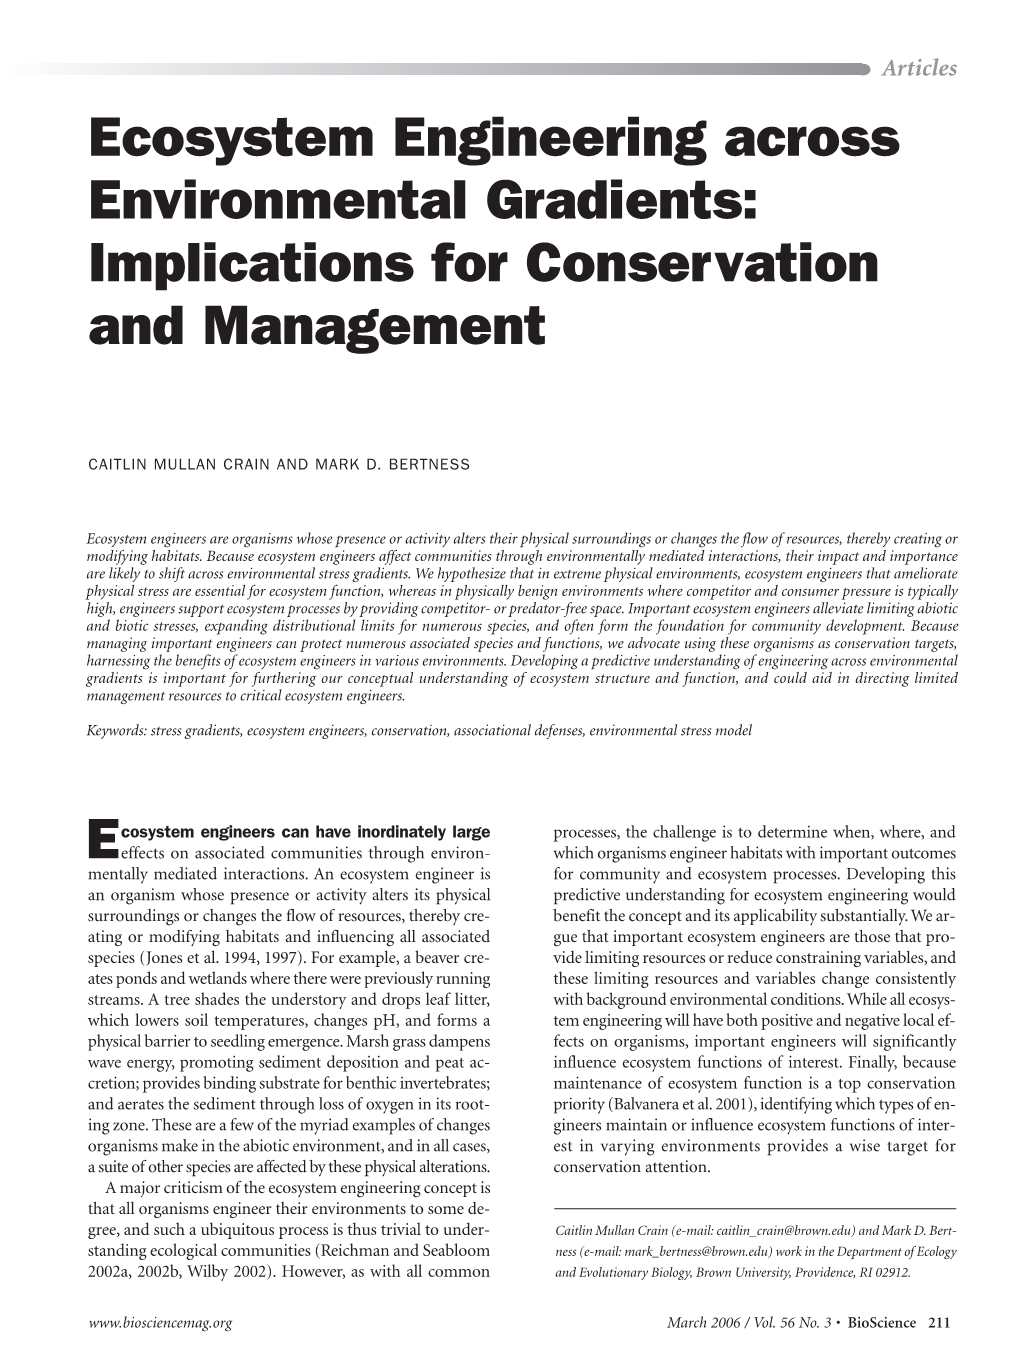 Ecosystem Engineering Across Environmental Gradients: Implications for Conservation and Management